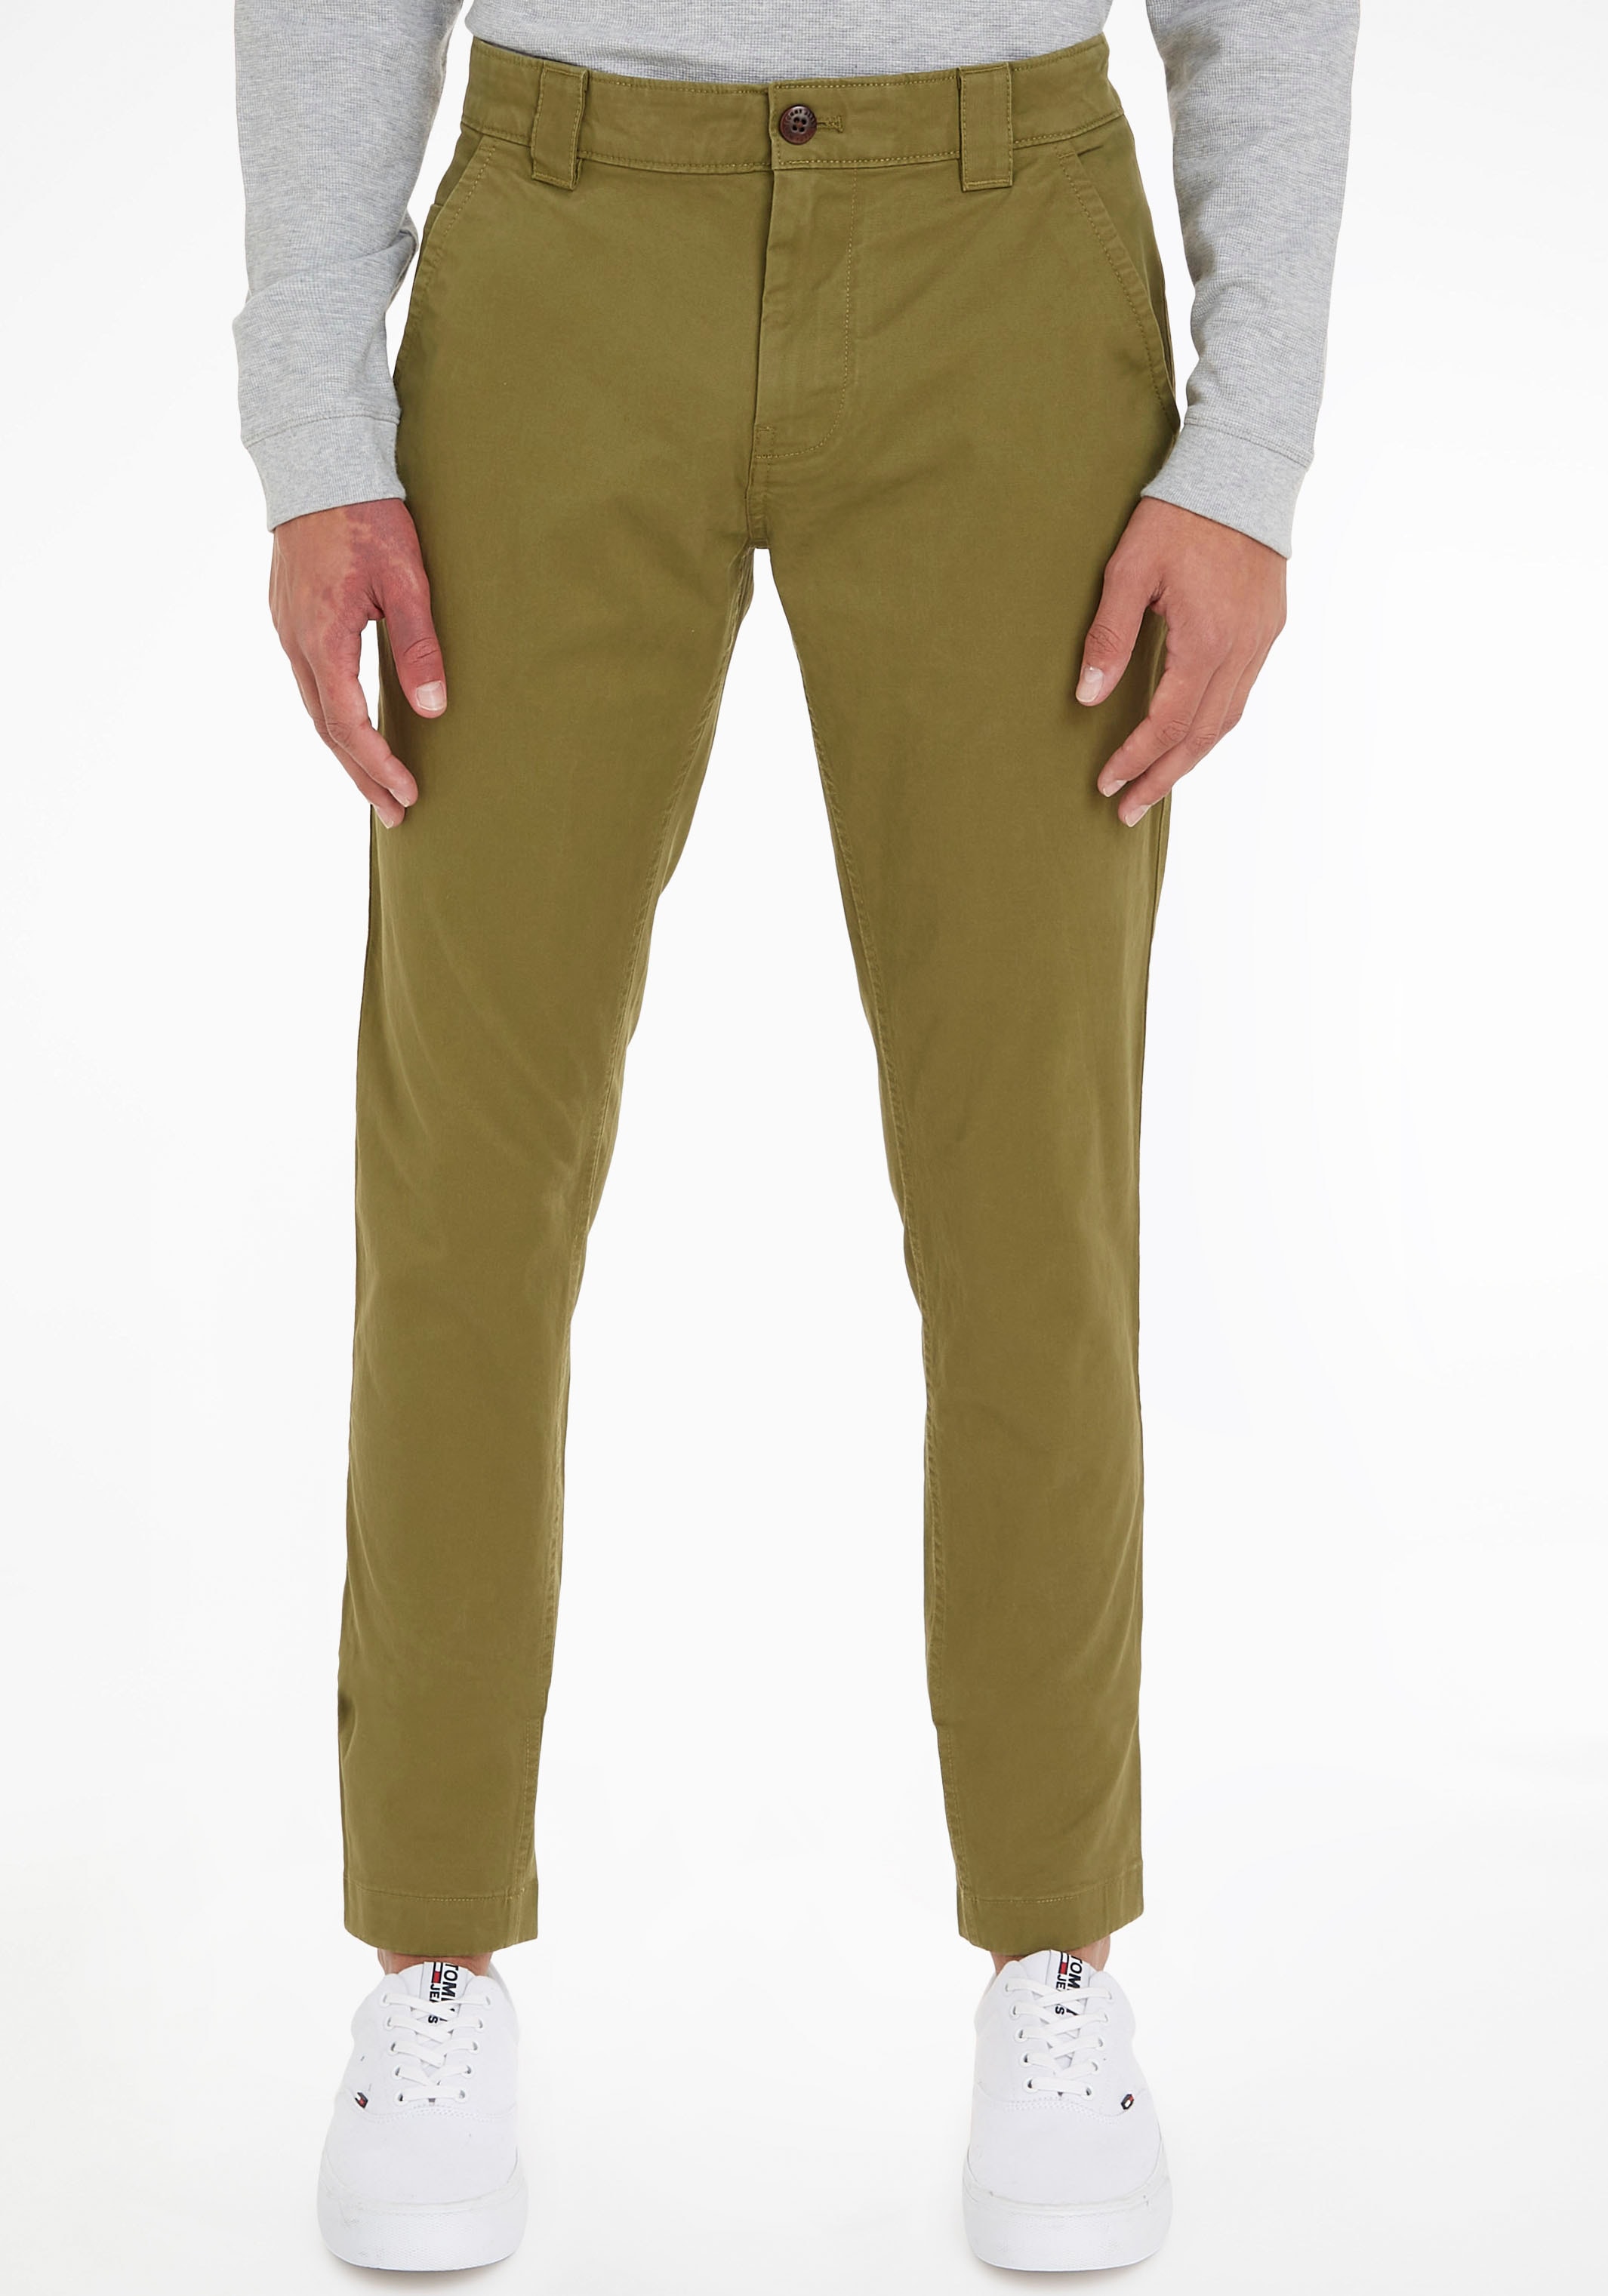 CHINO ♕ SCANTON Markenlabel Jeans bei PANT«, »TJM mit Tommy Chinohose